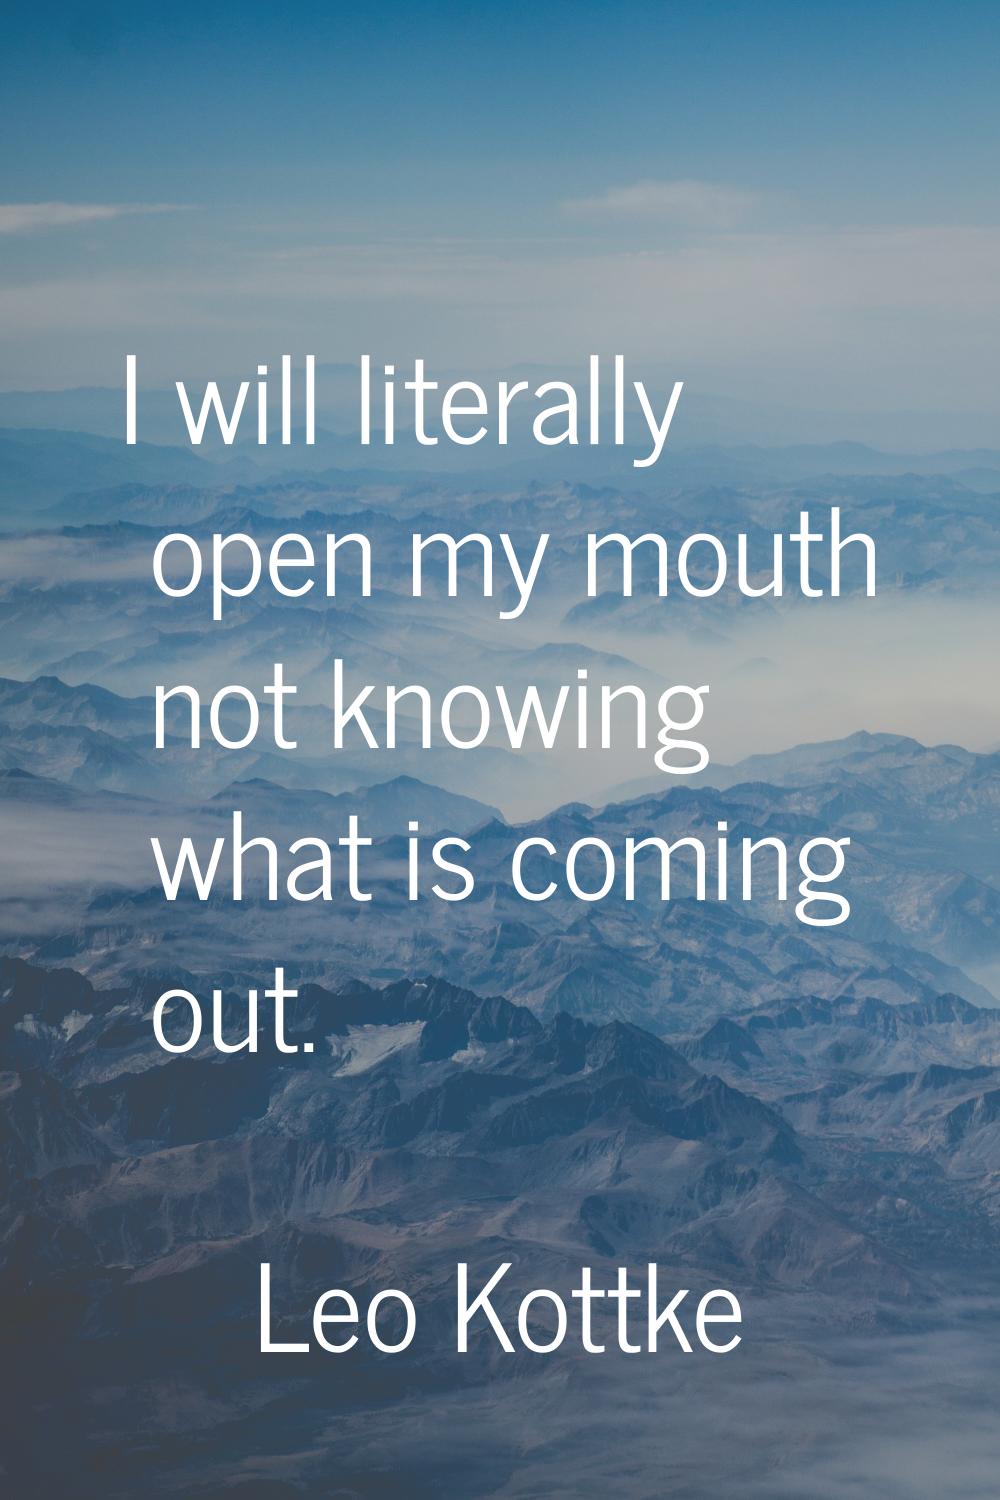 I will literally open my mouth not knowing what is coming out.